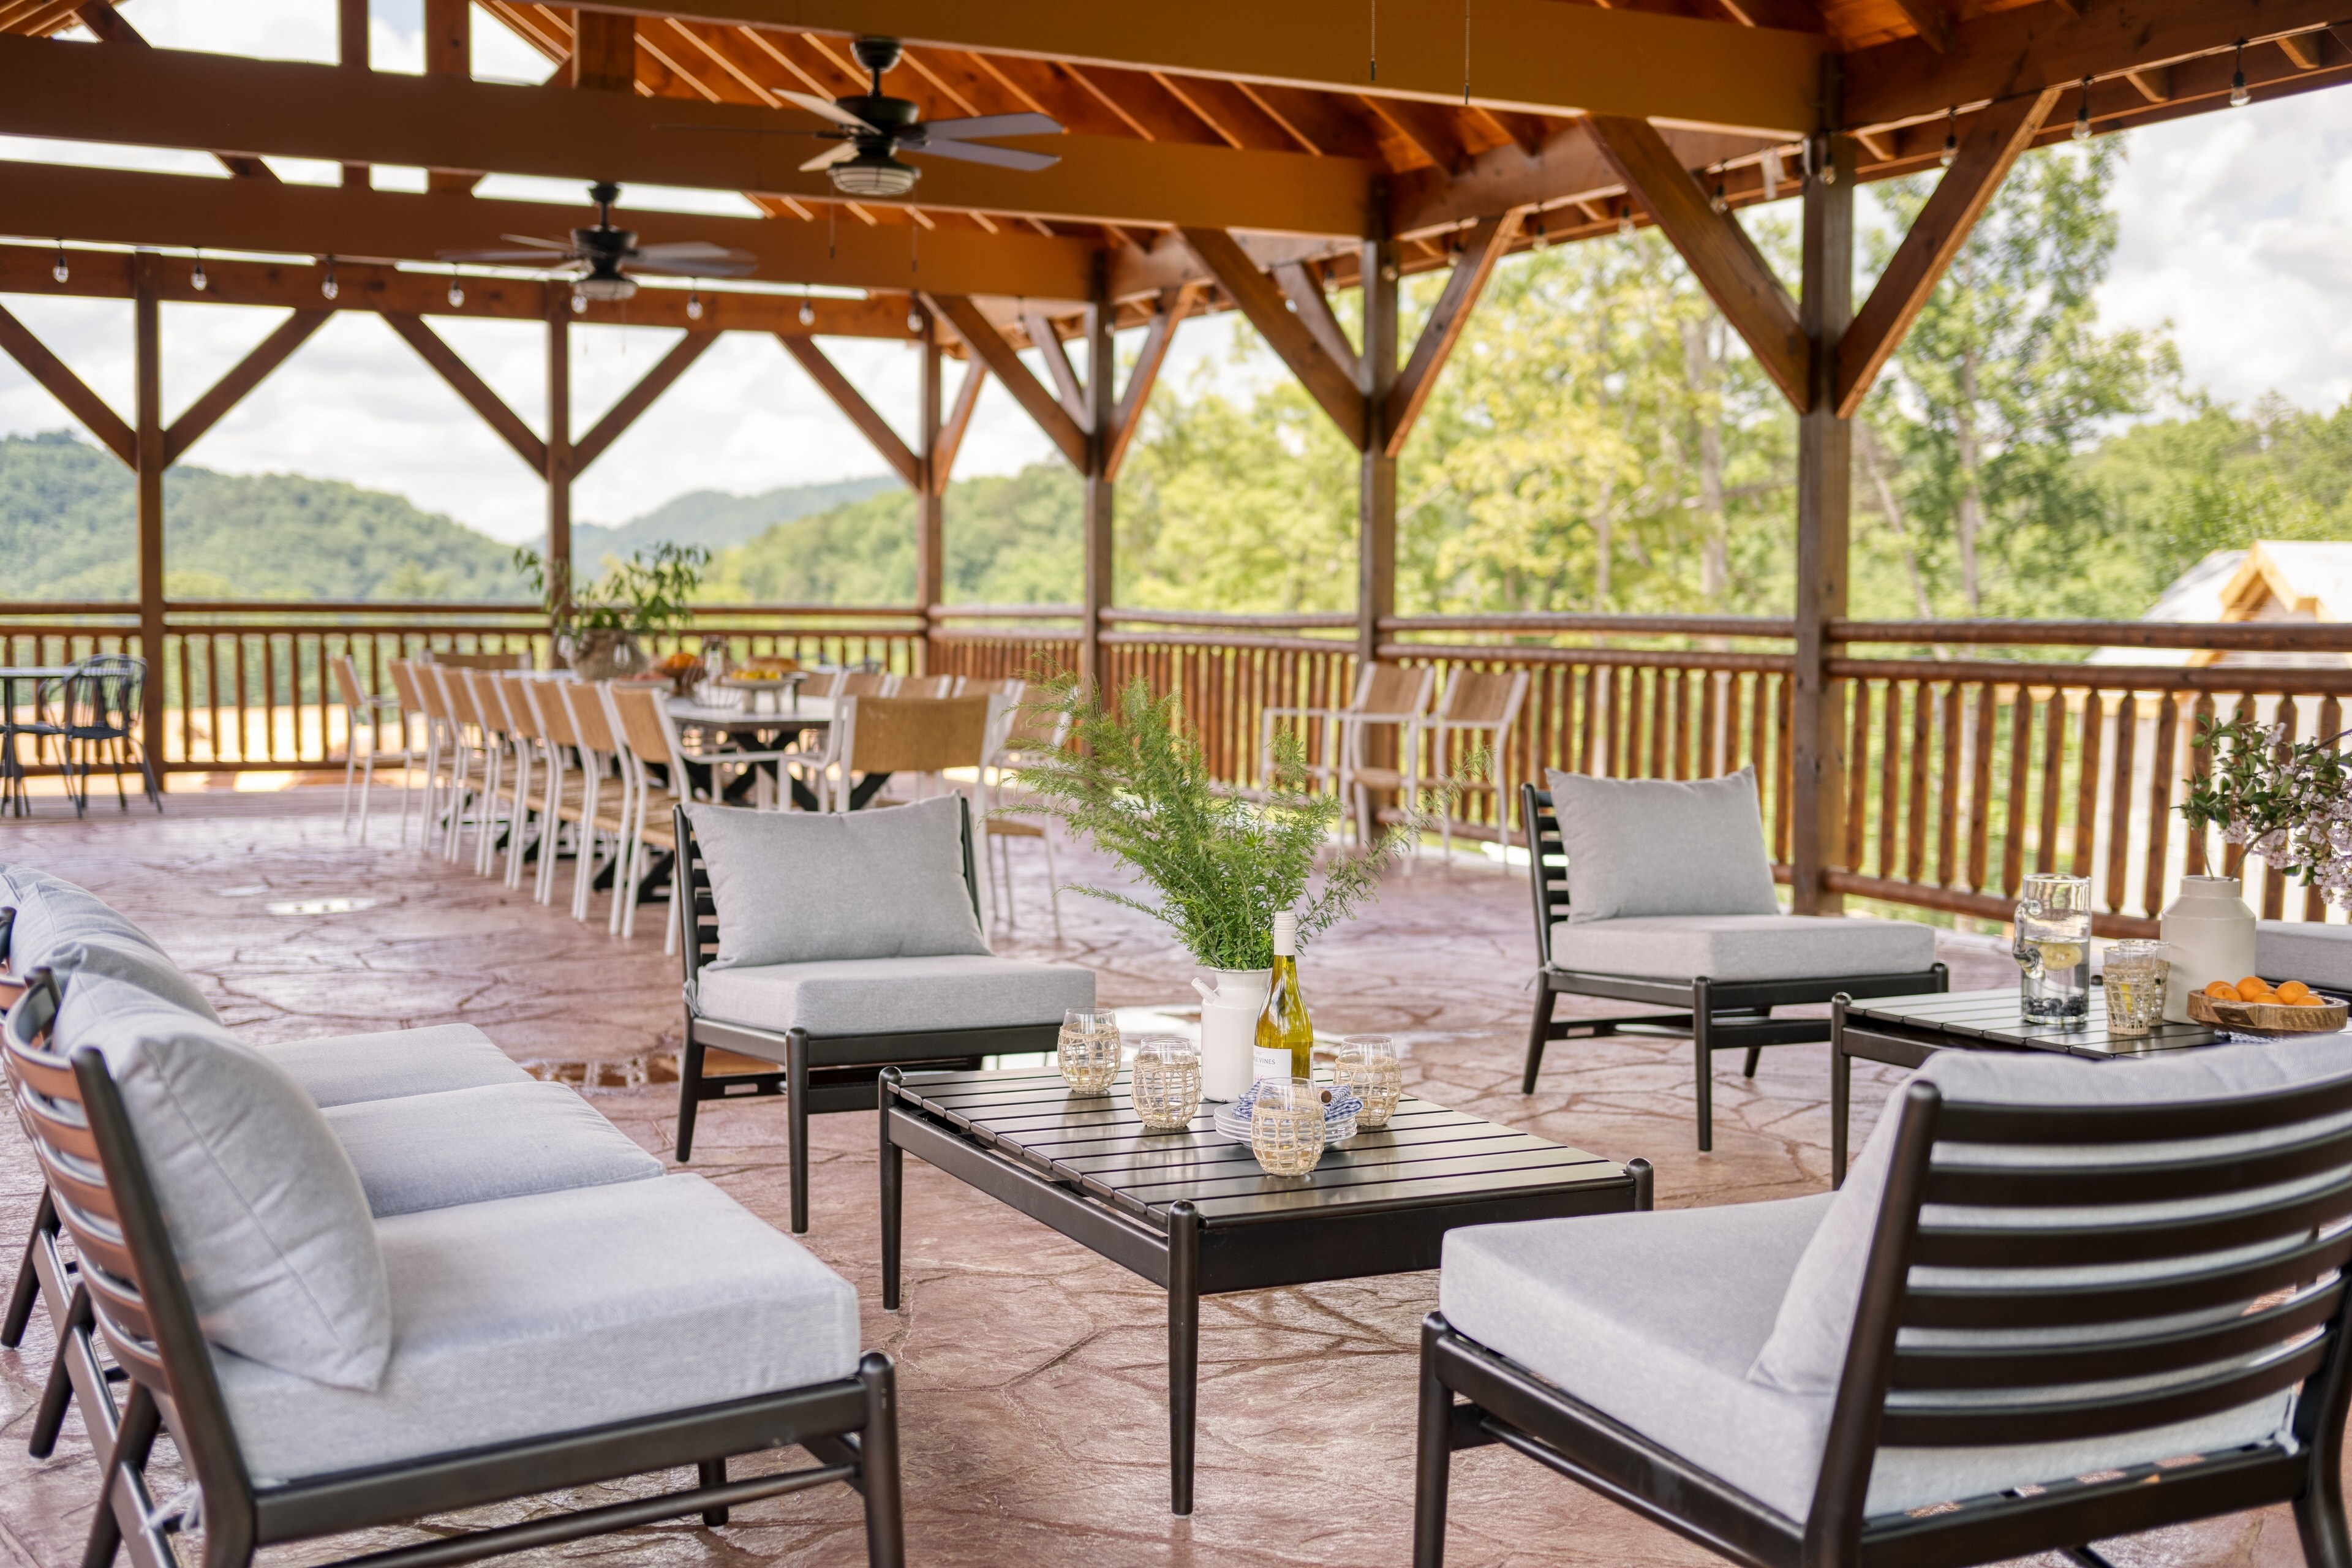 Easily host a large group or event in the outdoor pavilion.